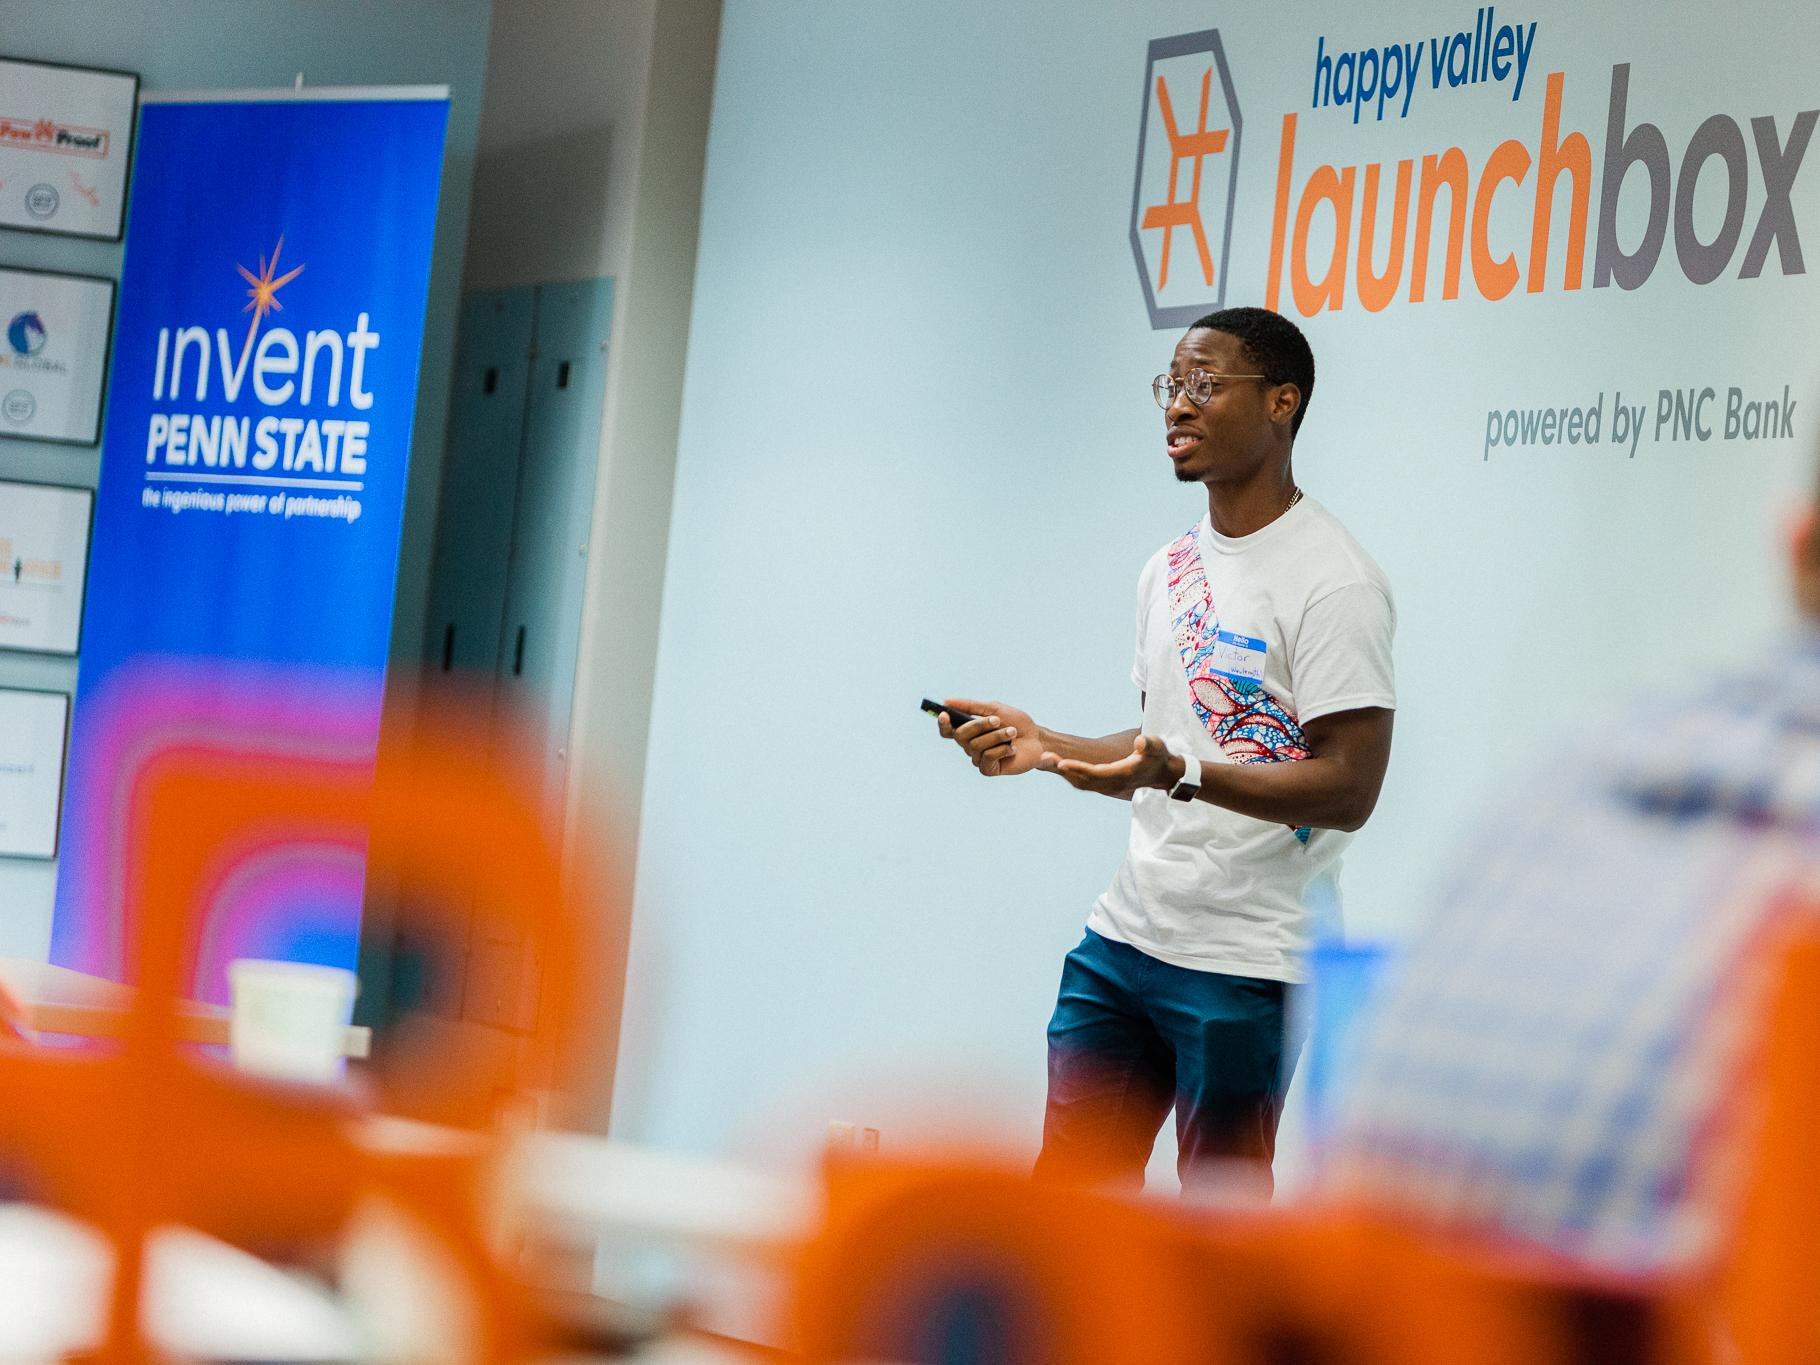 6 student startups each receive $15,000, selected into Summer Founders program